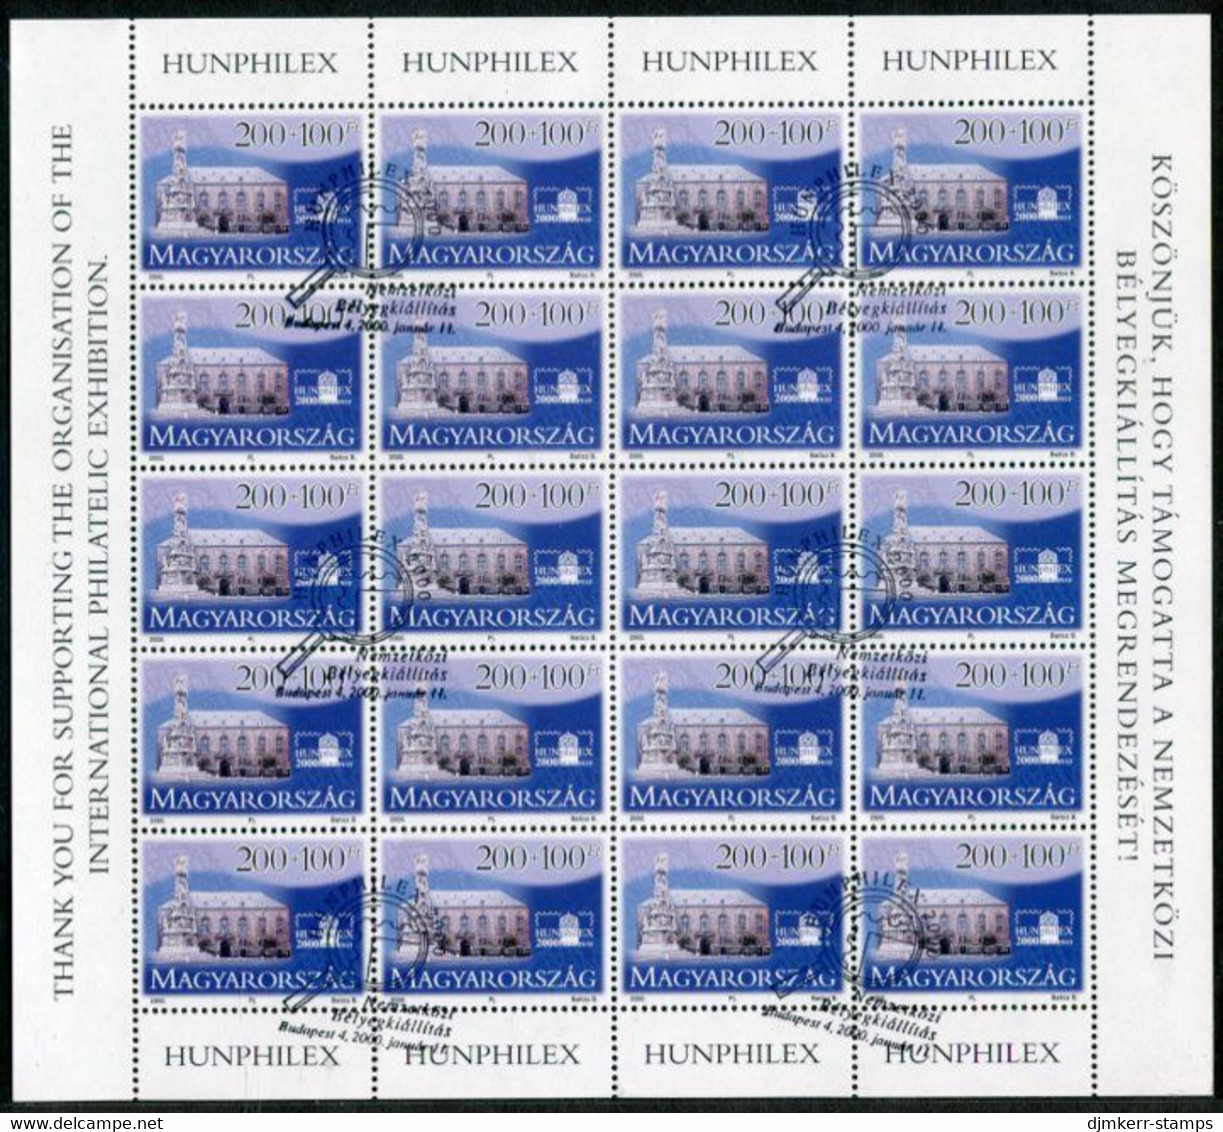 HUNGARY 2000 HUNPHILEX Stamp Exhibition. Sheet Of 20, Cancelled.  Michel 4578 - Blocs-feuillets